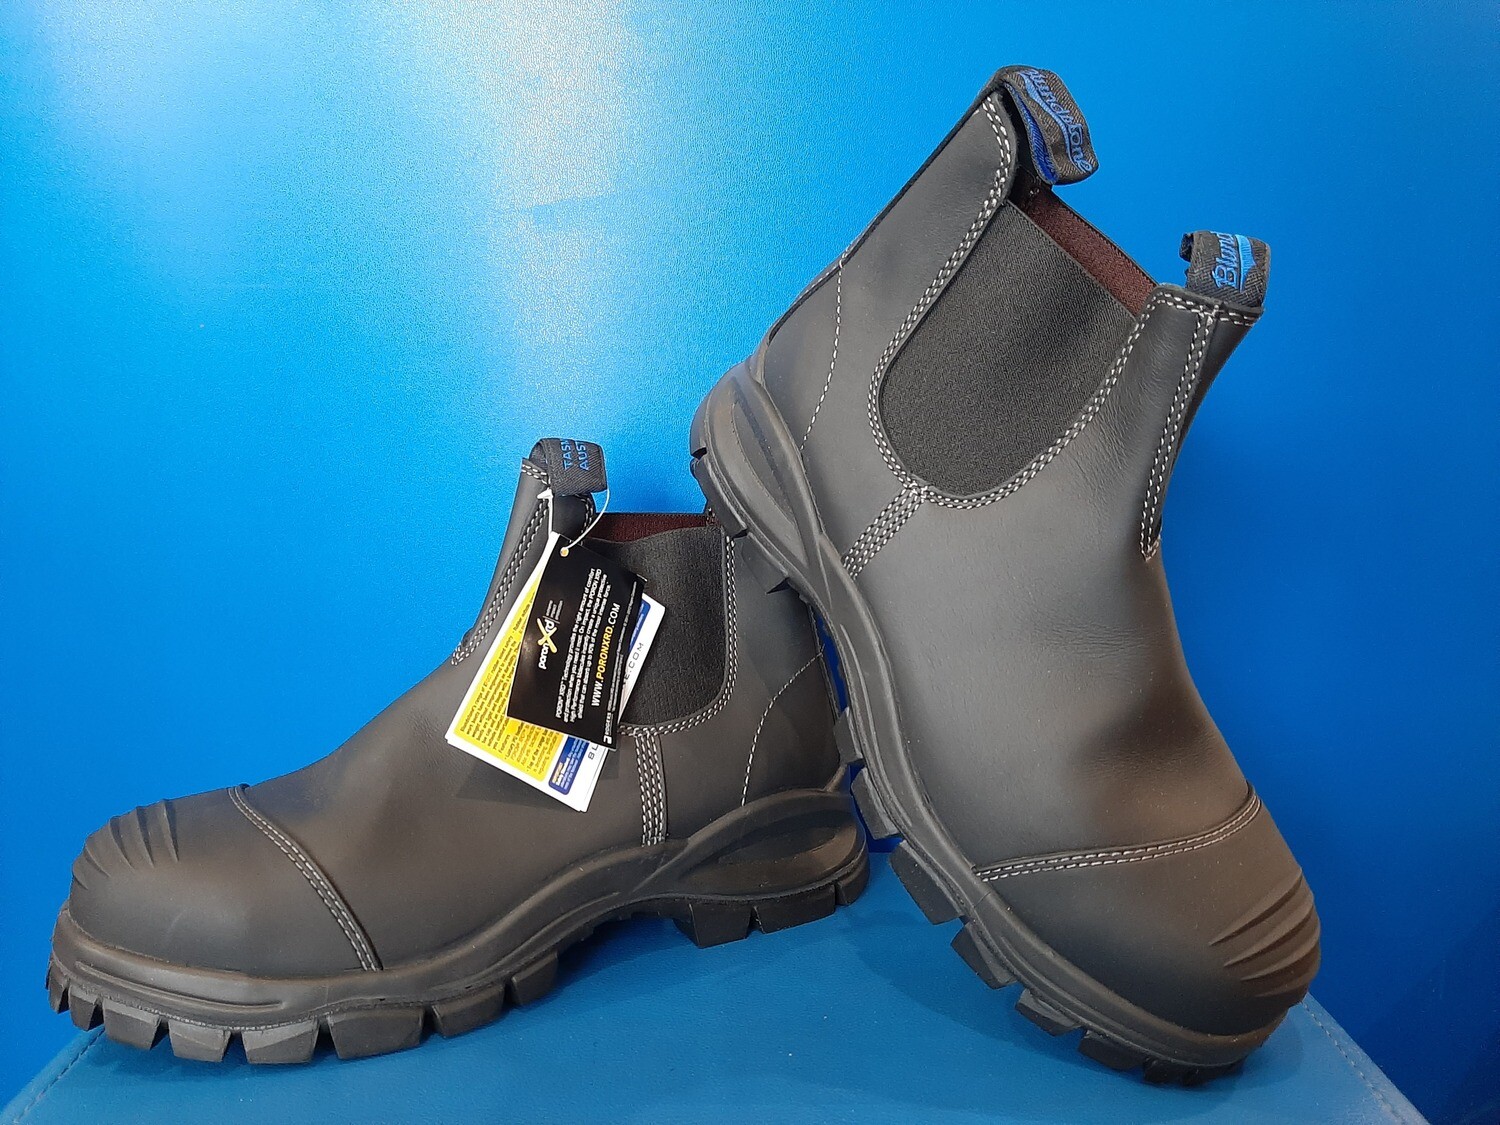 Blundstone Style 990 Unisex Elastic Sided Safety Boots Black Mens US11 Womens US13 (New) (EC2667)